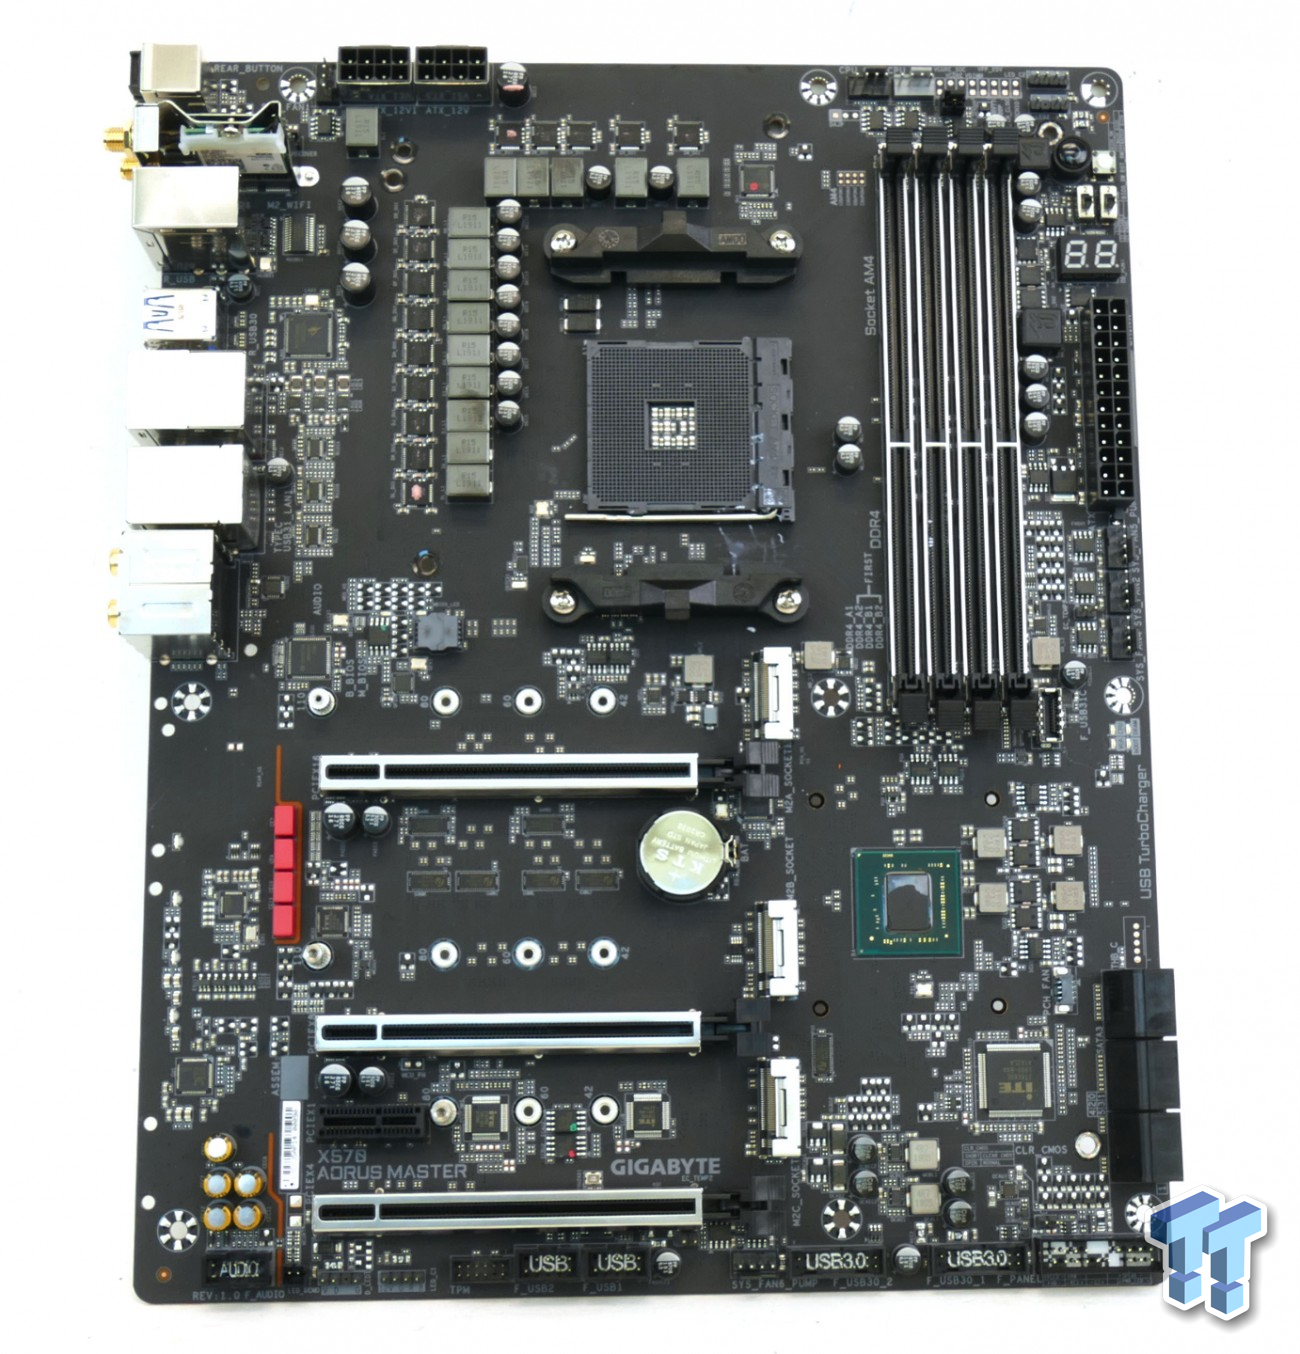 GIGABYTE X570 Aorus Master (AMD X570) Motherboard Review